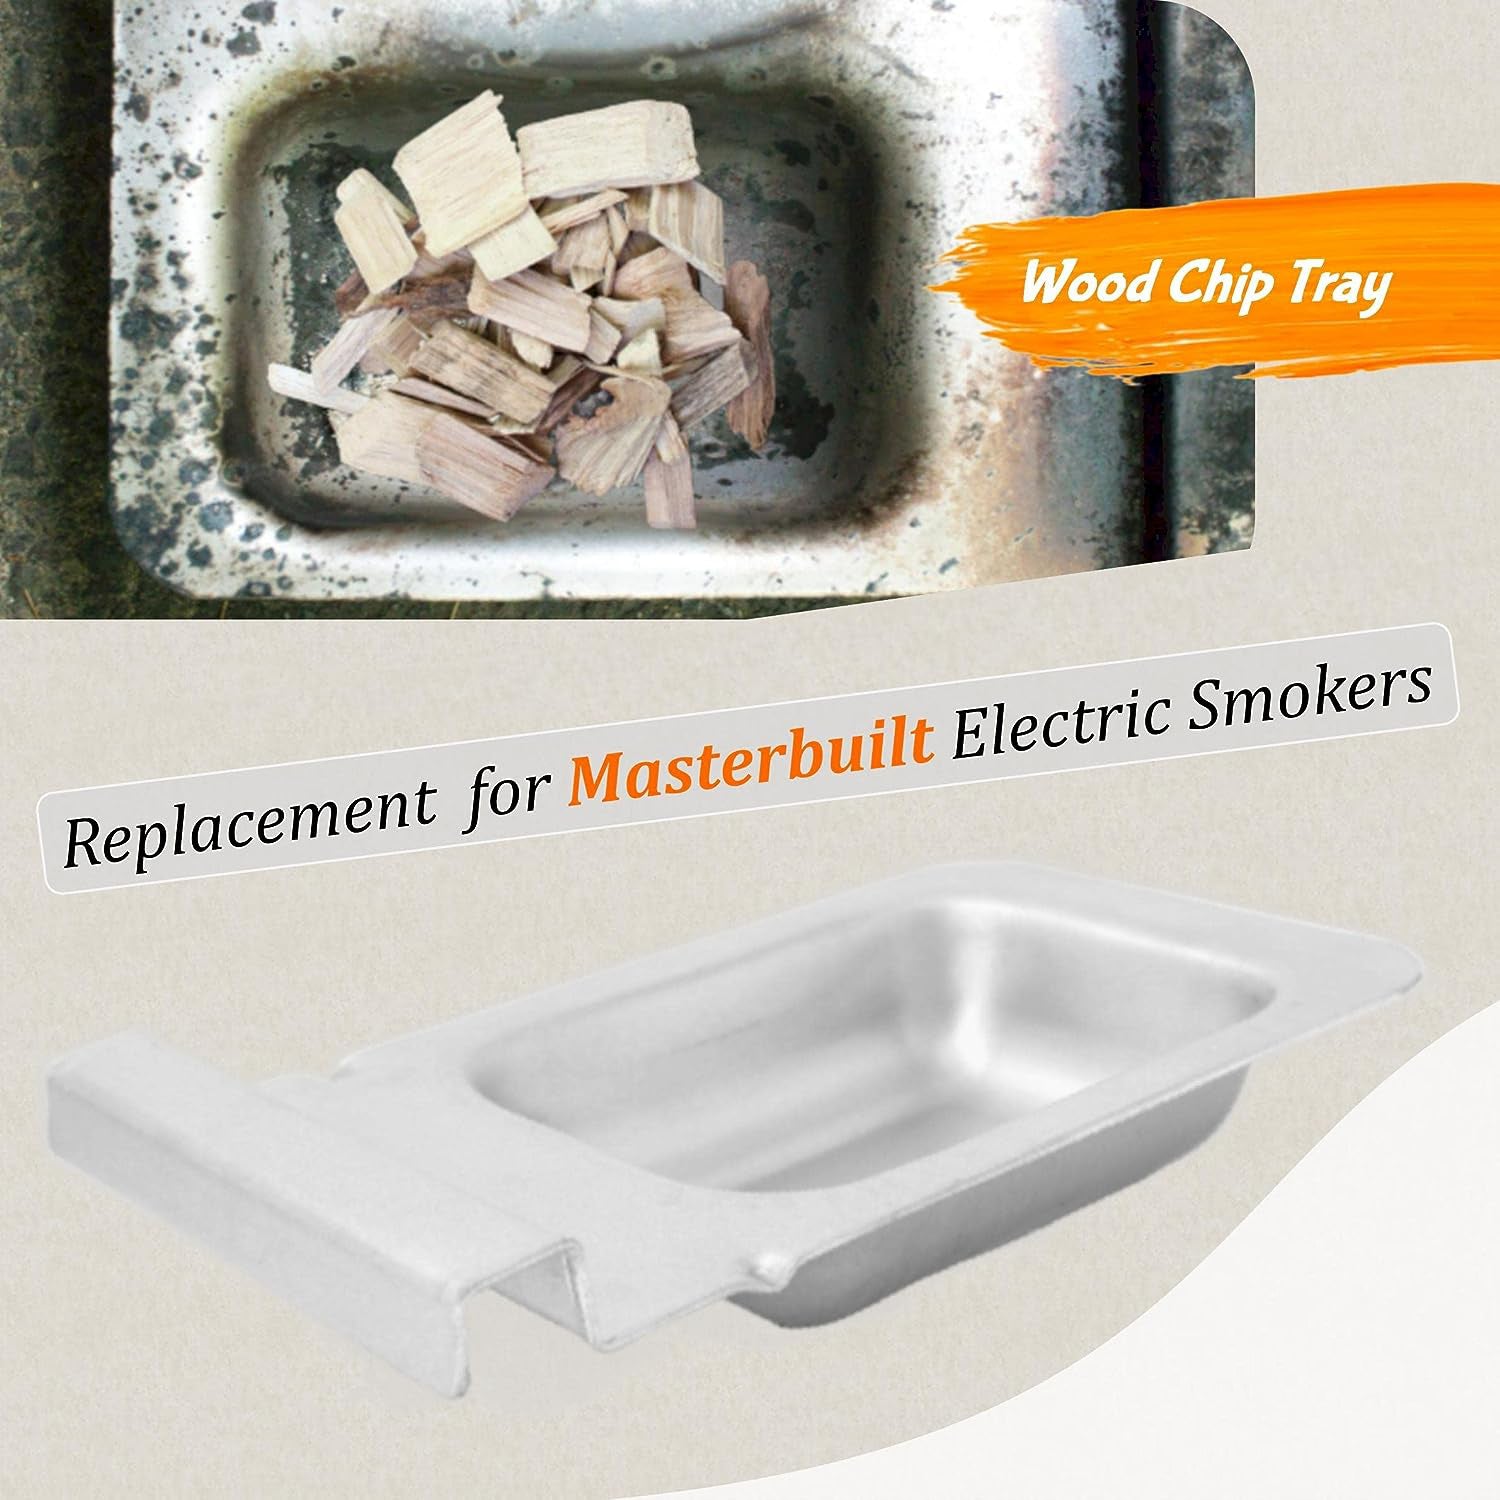 Replacement Wood Chip Tray-9007140023 Compatible with Masterbuilt 30 inch & 40 inch Digital Electric Smoker,for Masterbuilt Electric Smoker Parts